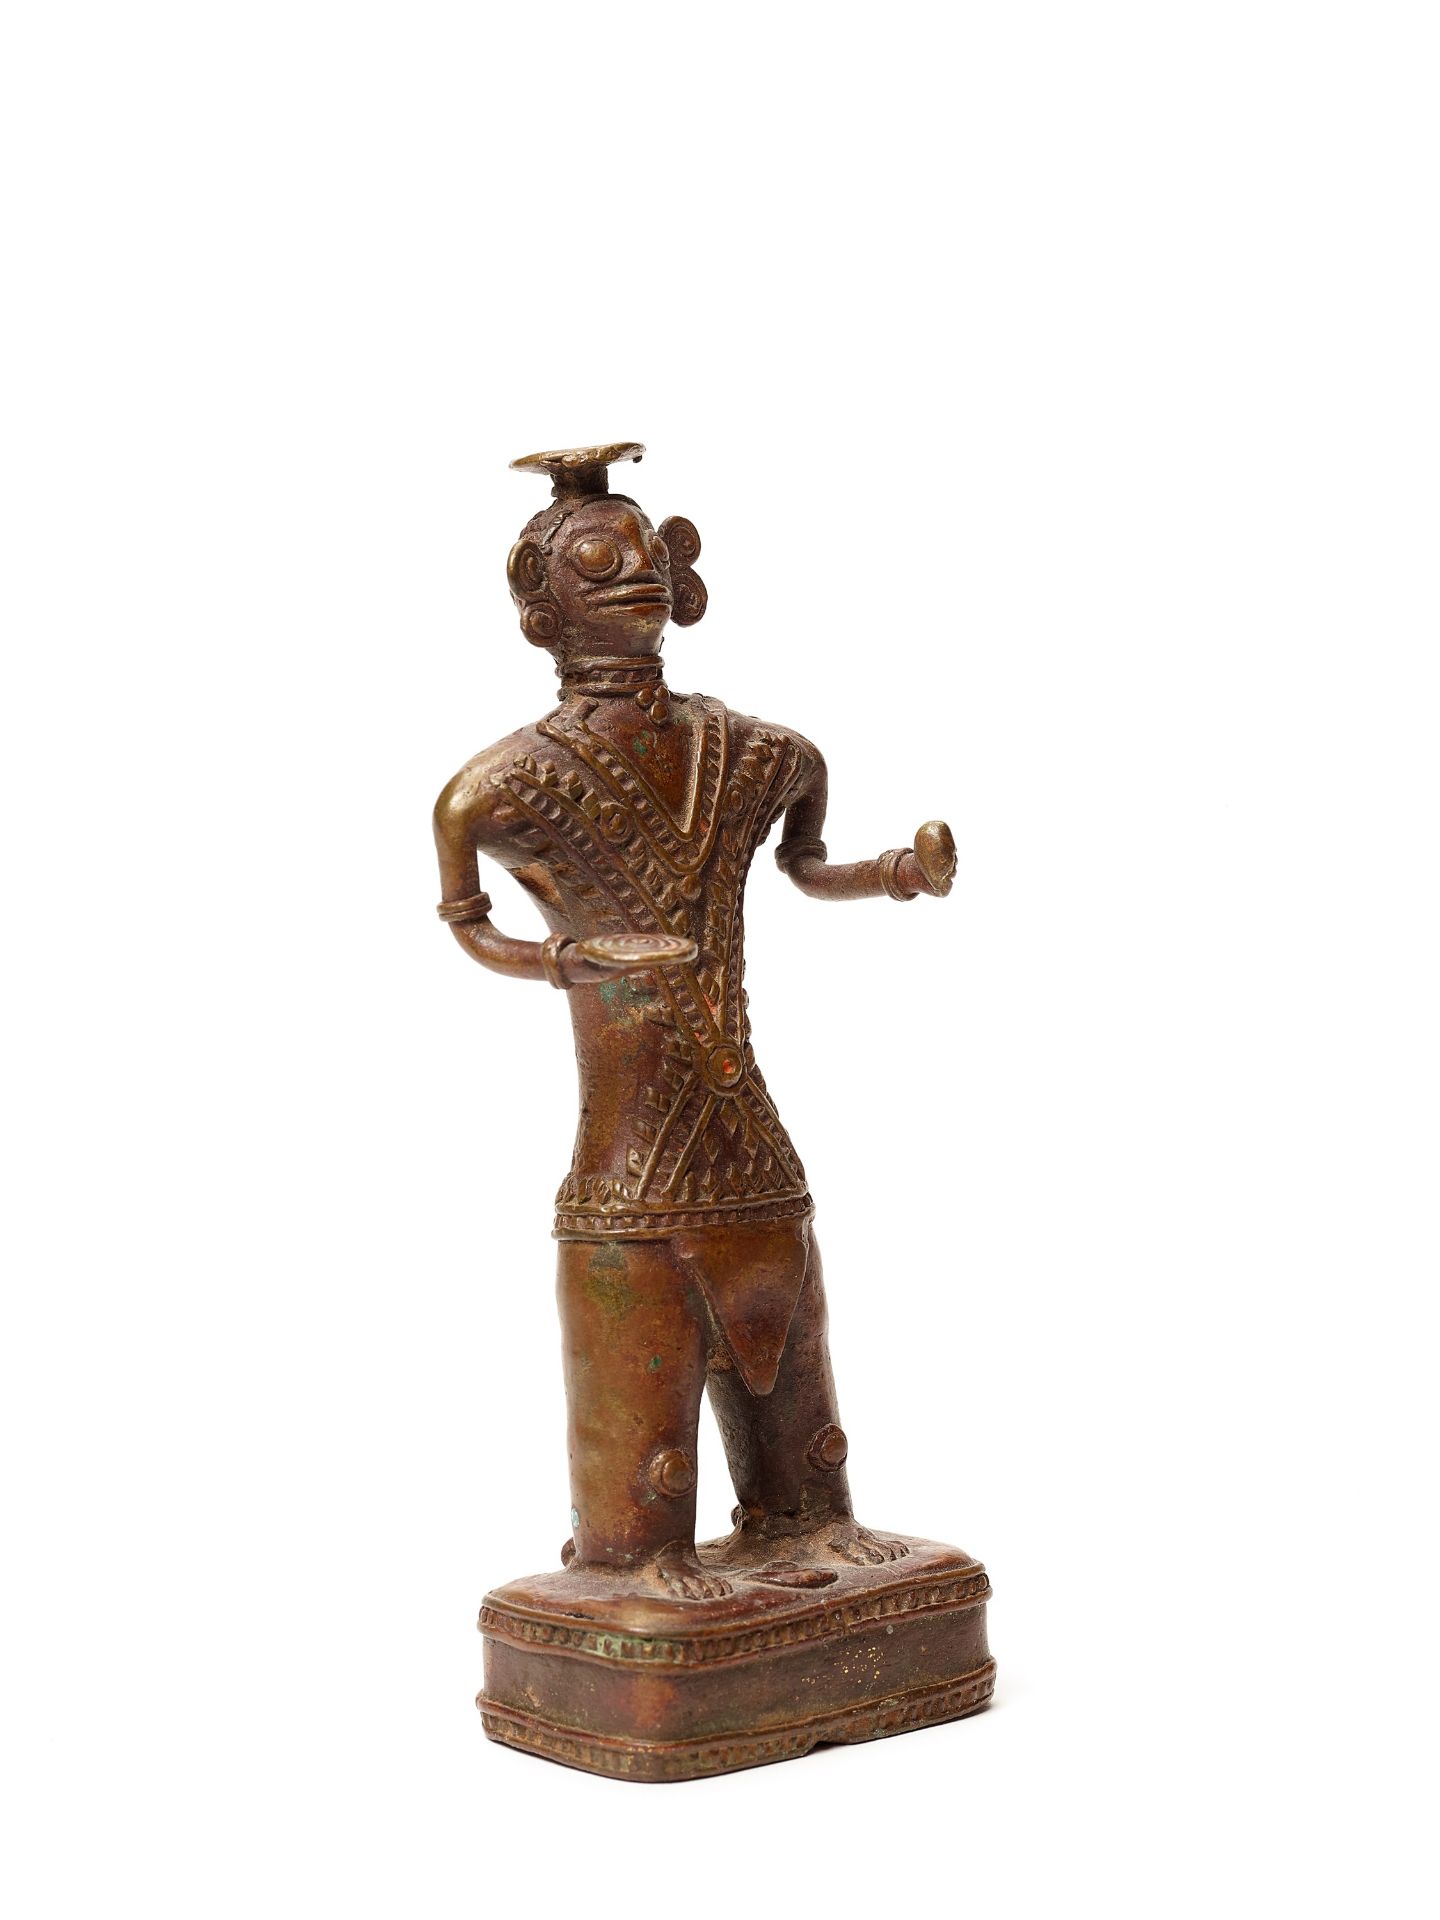 A UNIQUE BATAR BRONZE GODDESS WITH KHAPPAR AND A LOTUS BUD - Image 4 of 4